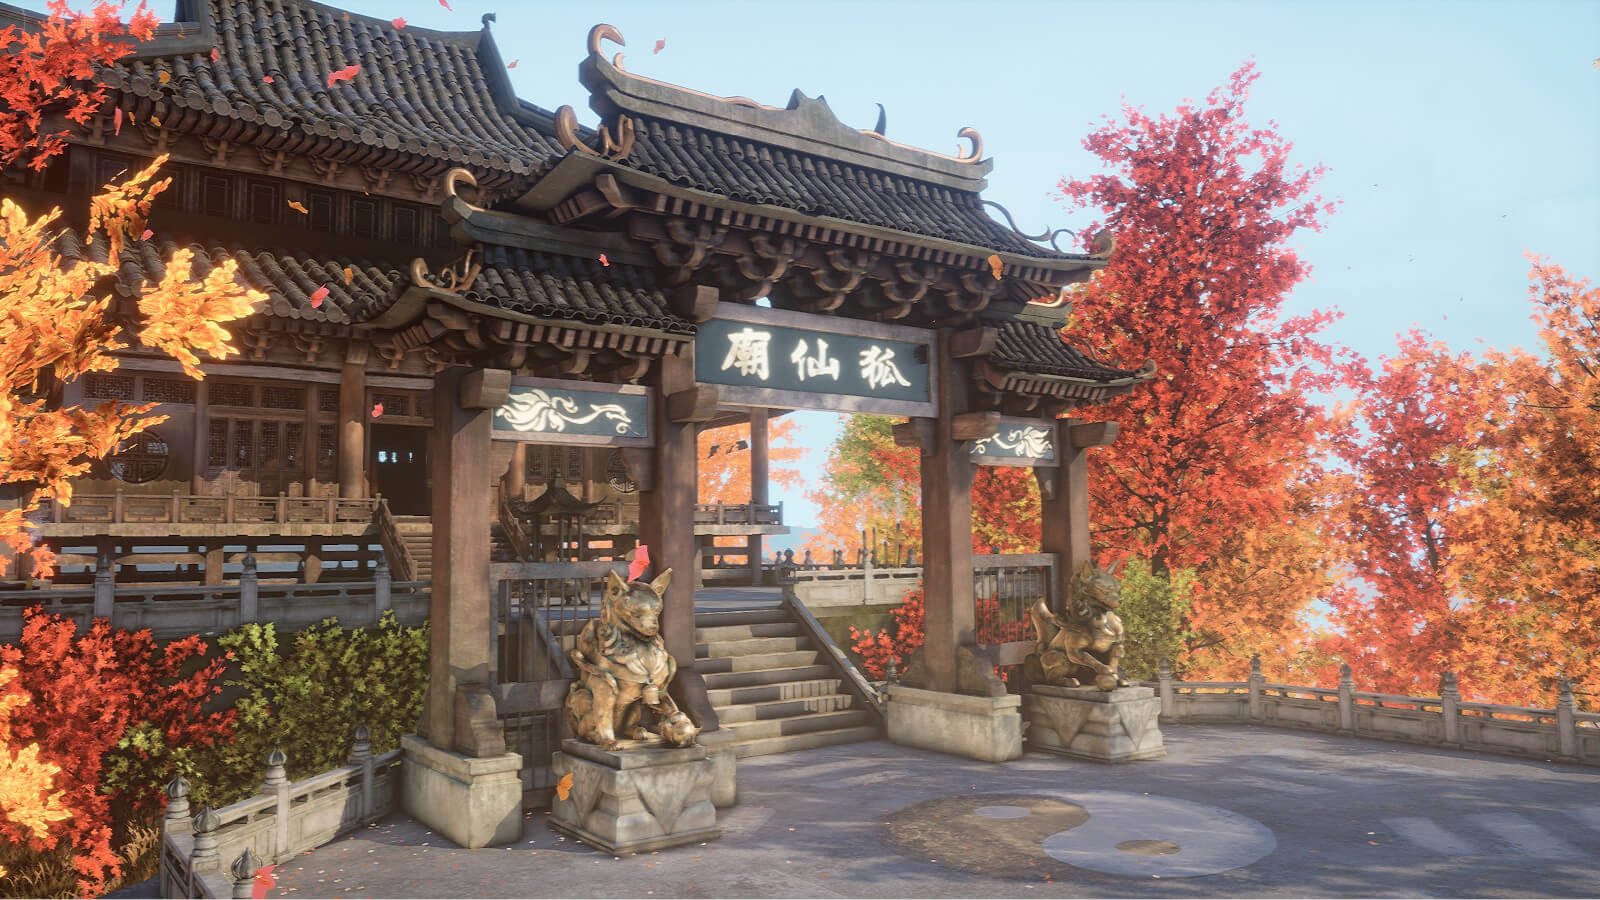 Exterior of a temple in Autumn